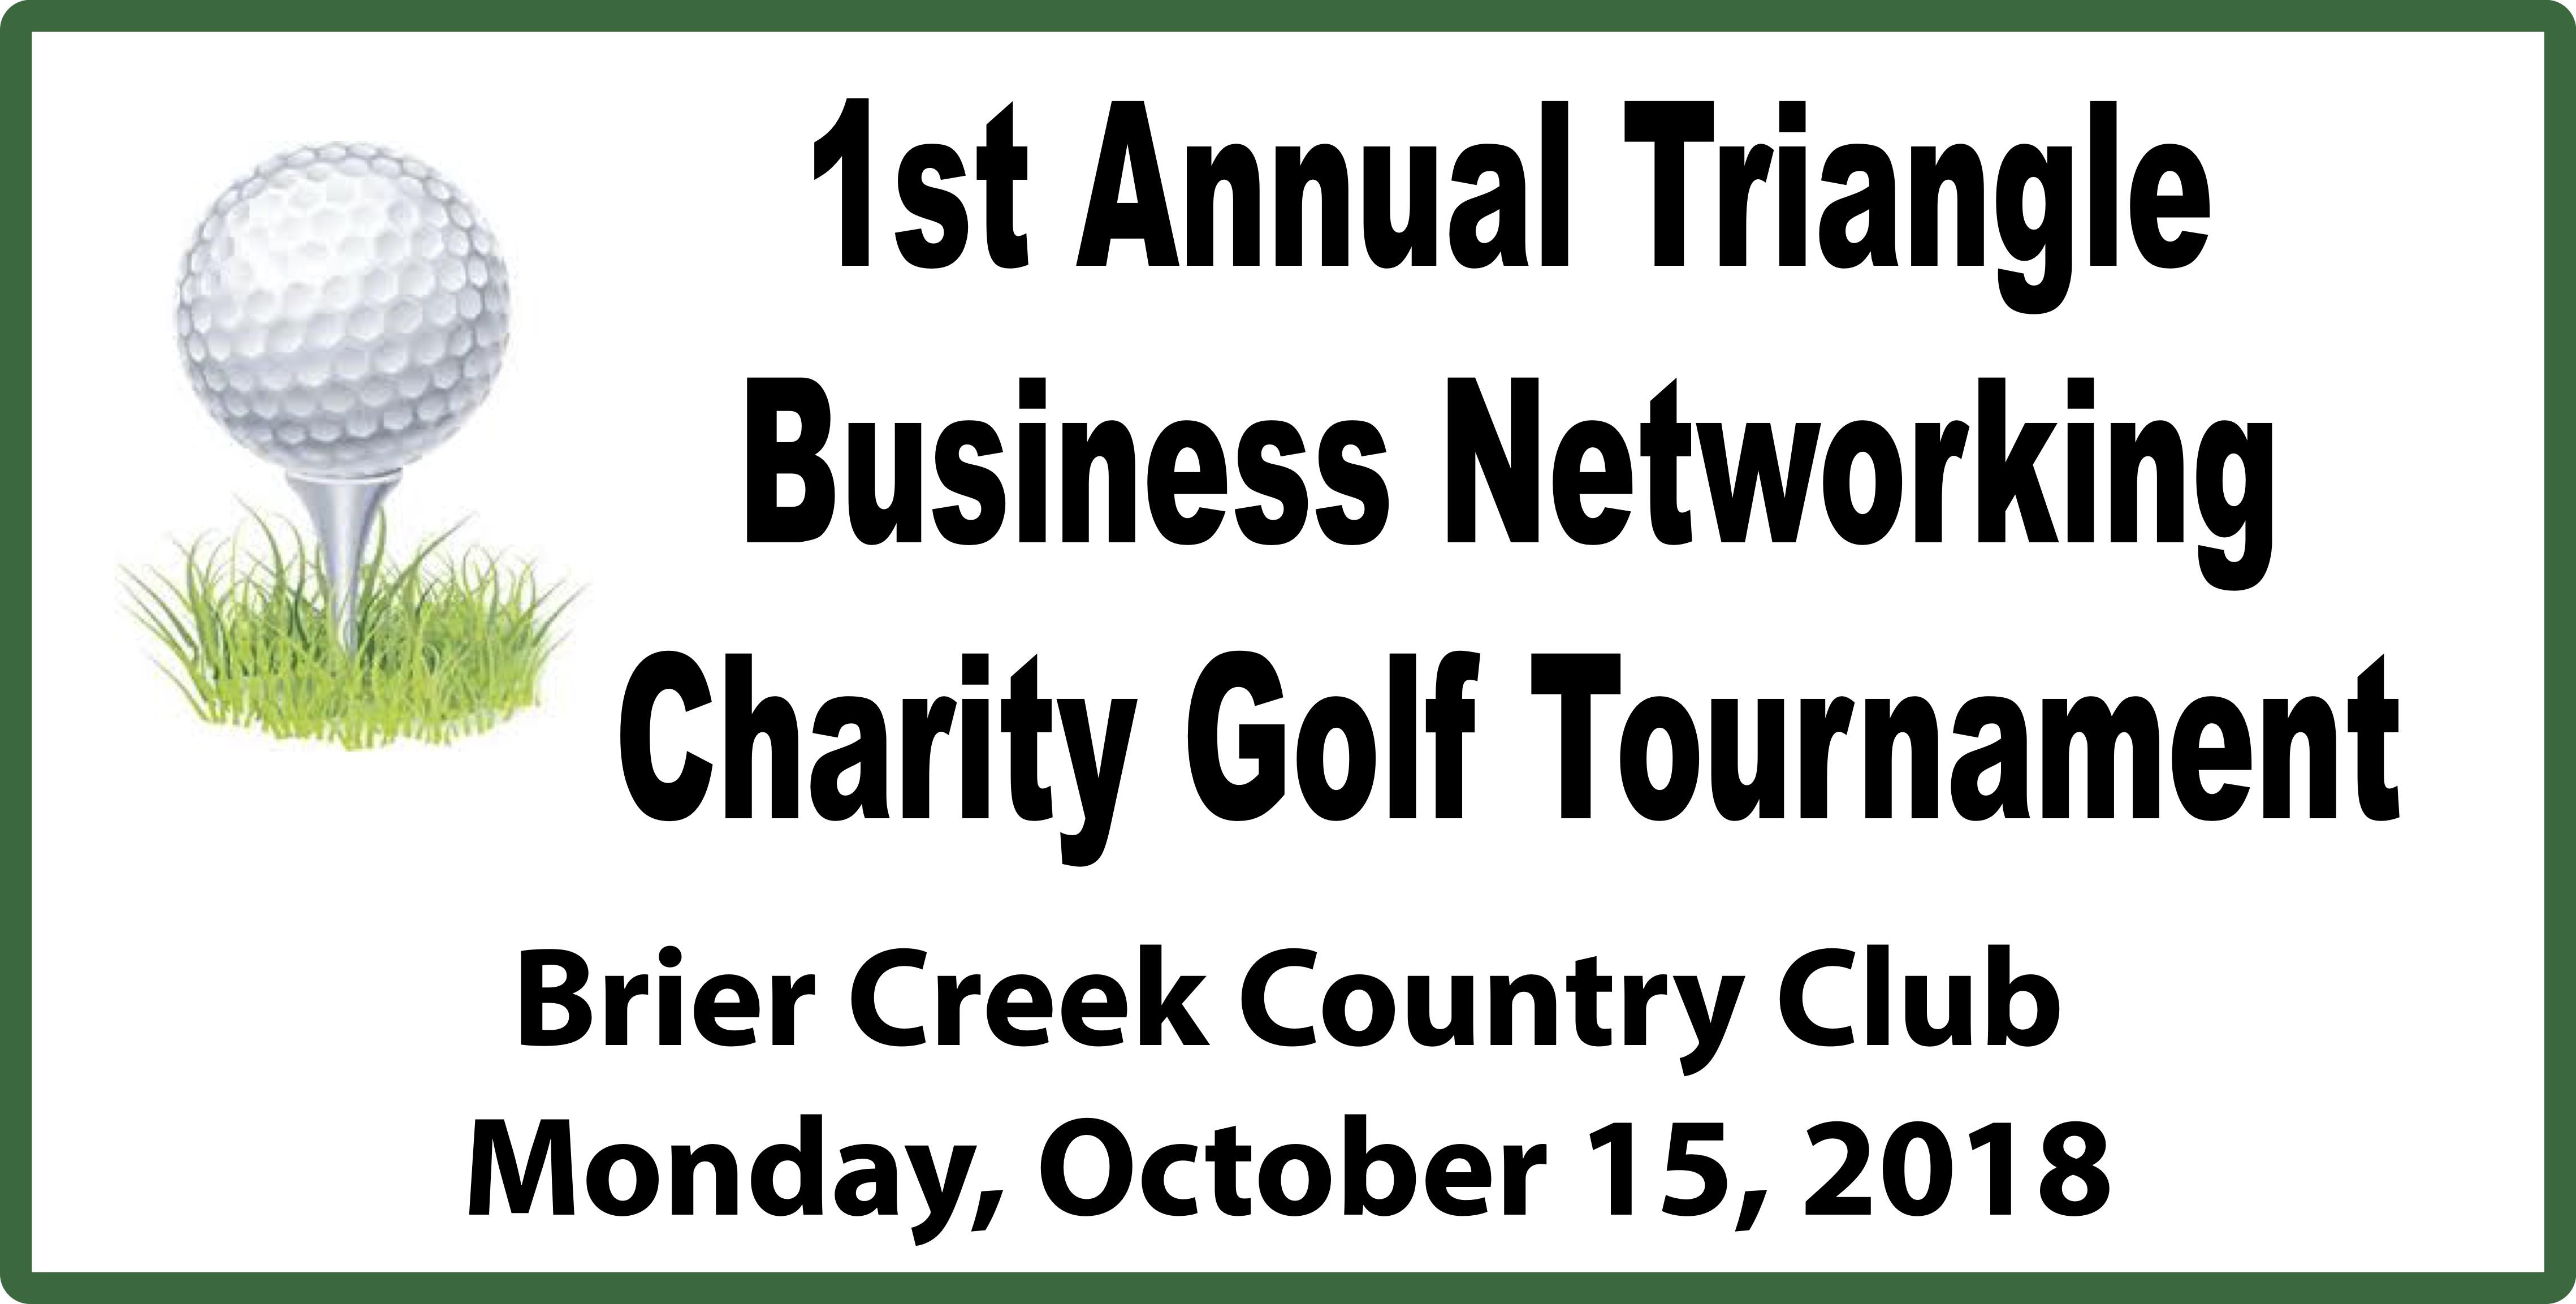 1st Annual Triangle Business Networking Charity Golf Tournament